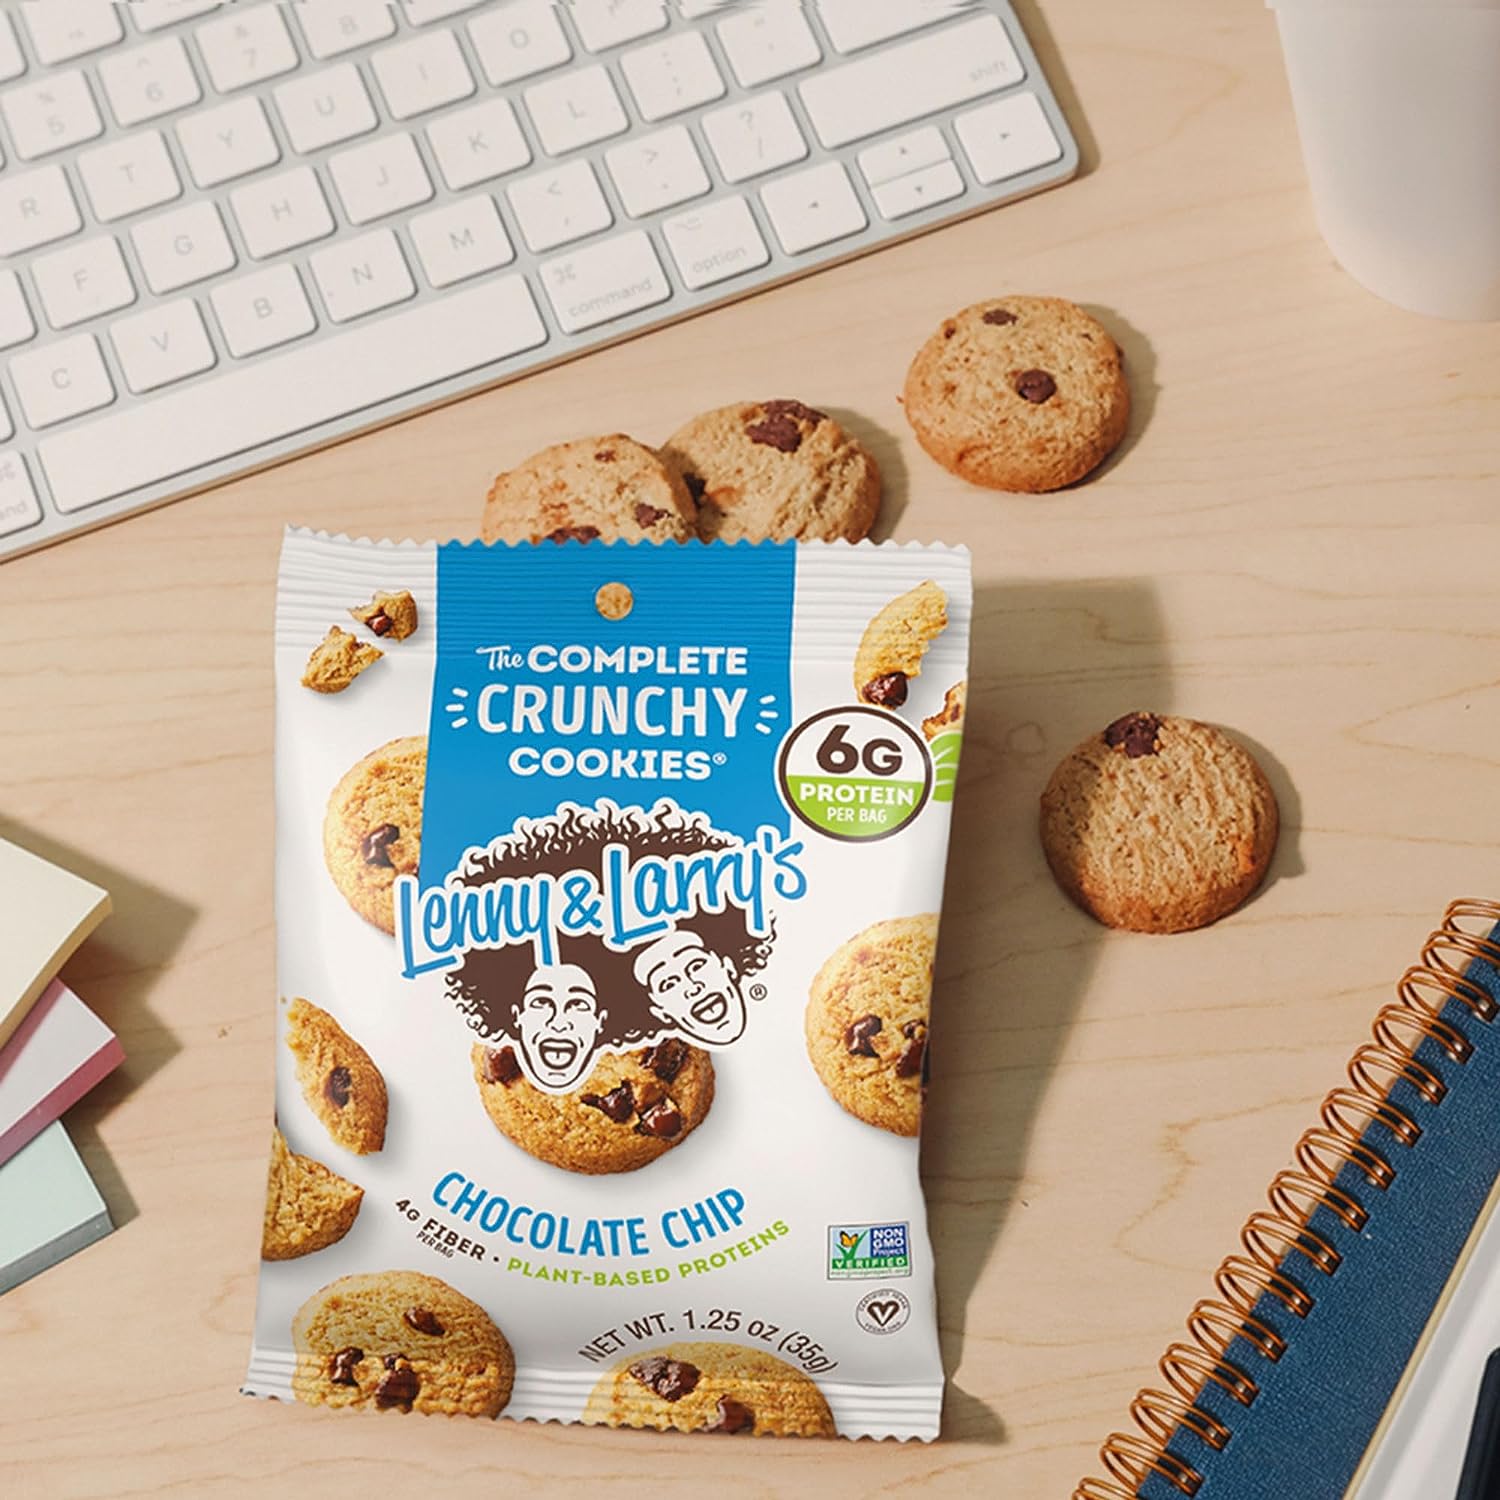 Lenny & Larry's The Complete Crunchy Cookie, Chocolate Chip, 6g Plant Protein, Vegan, Non-GMO, 35g